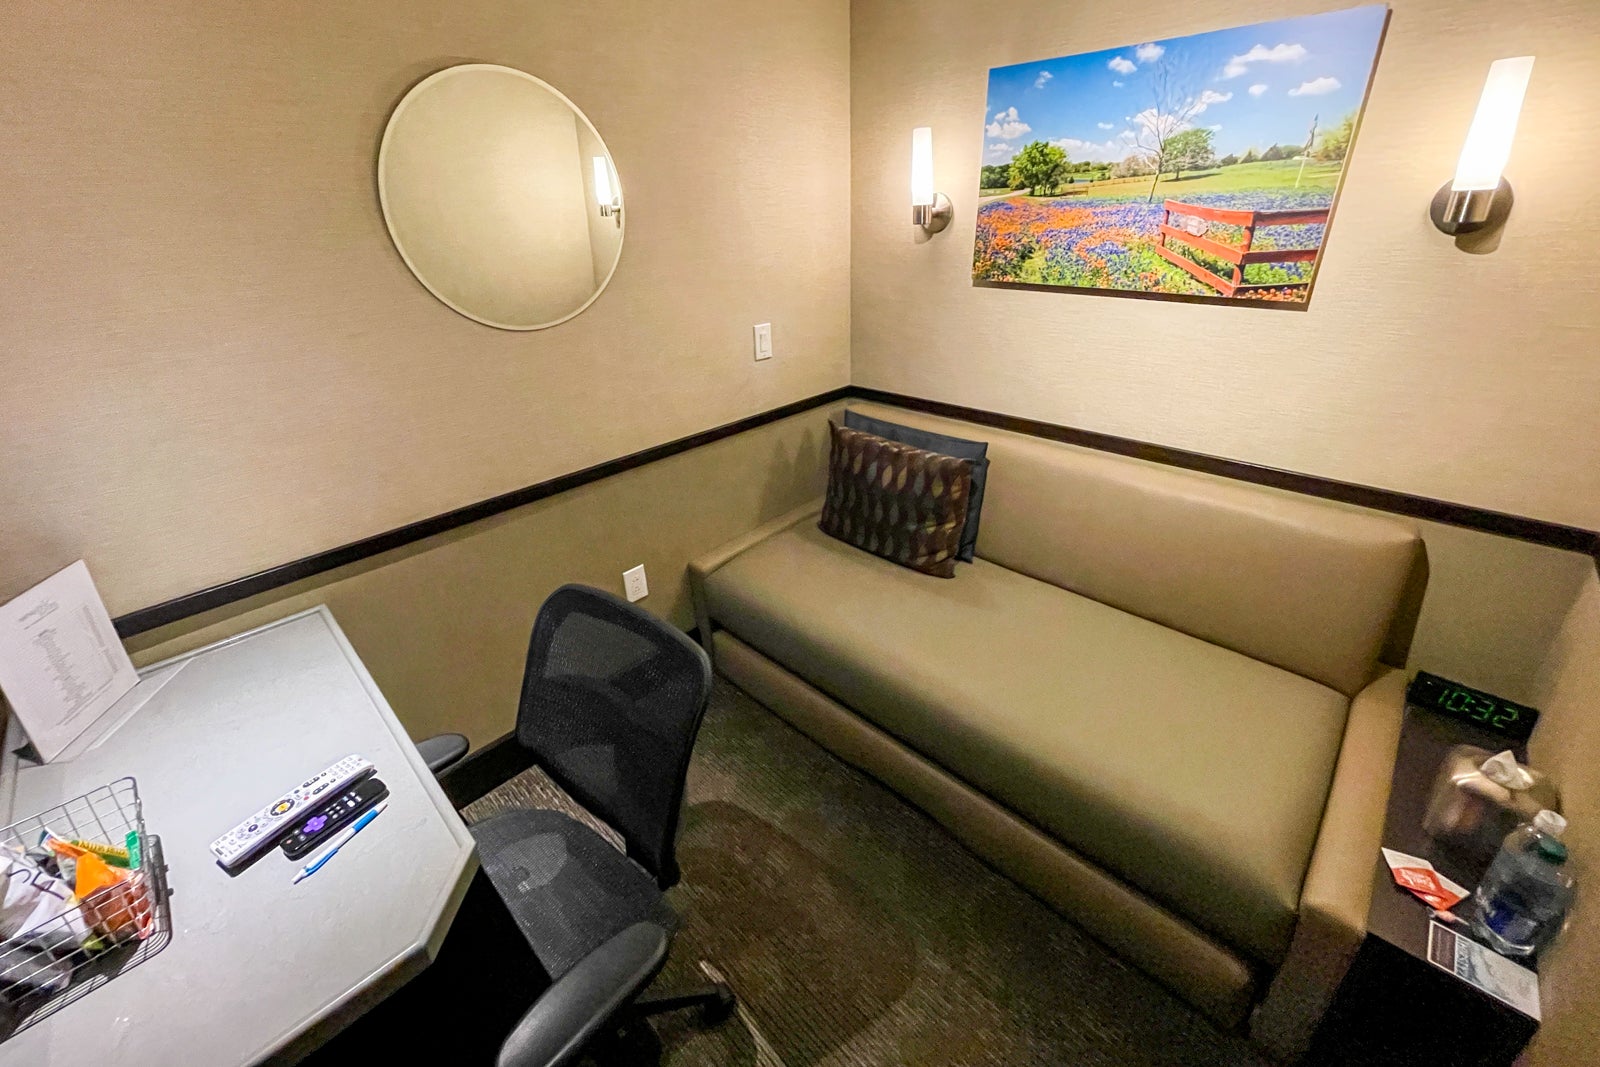 You are currently viewing Minute Suites: Complete guide to the airport lounge